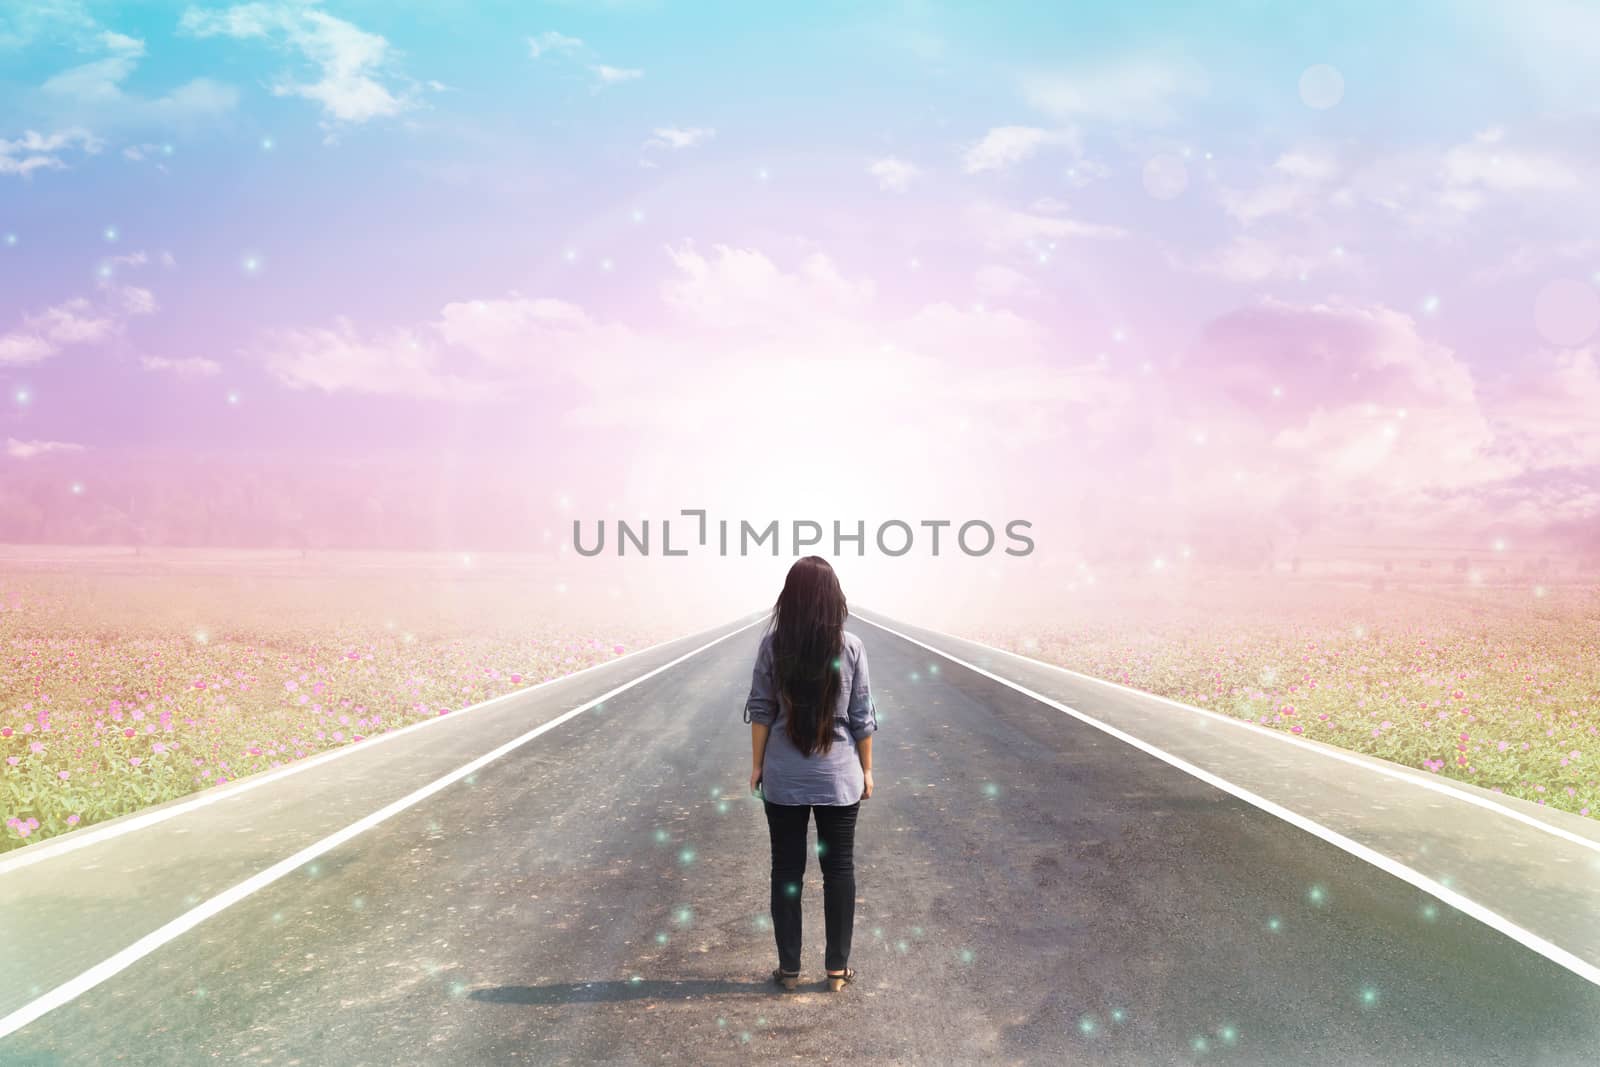  Back or rare of women standing on pavement road with dreamy morning sunlight, flower field  and lensflare background with copy space, concept road to heaven